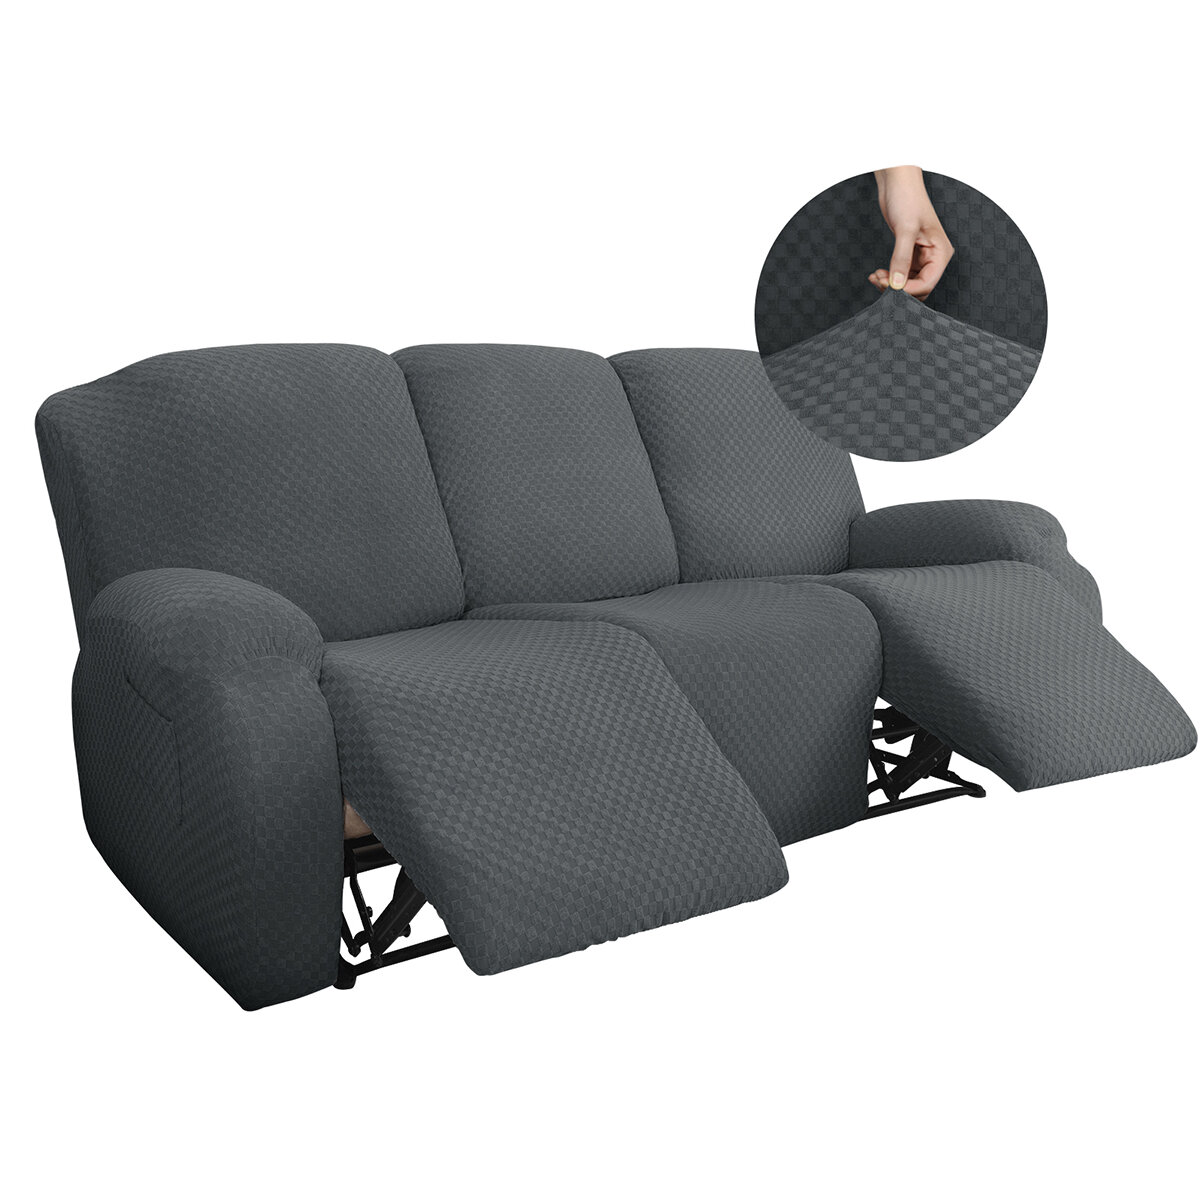 Image of Sofa Chair Pad 3 Seater Stretch Recliner Chair Cover Elastic Armchair Sofa Couch Slipcover